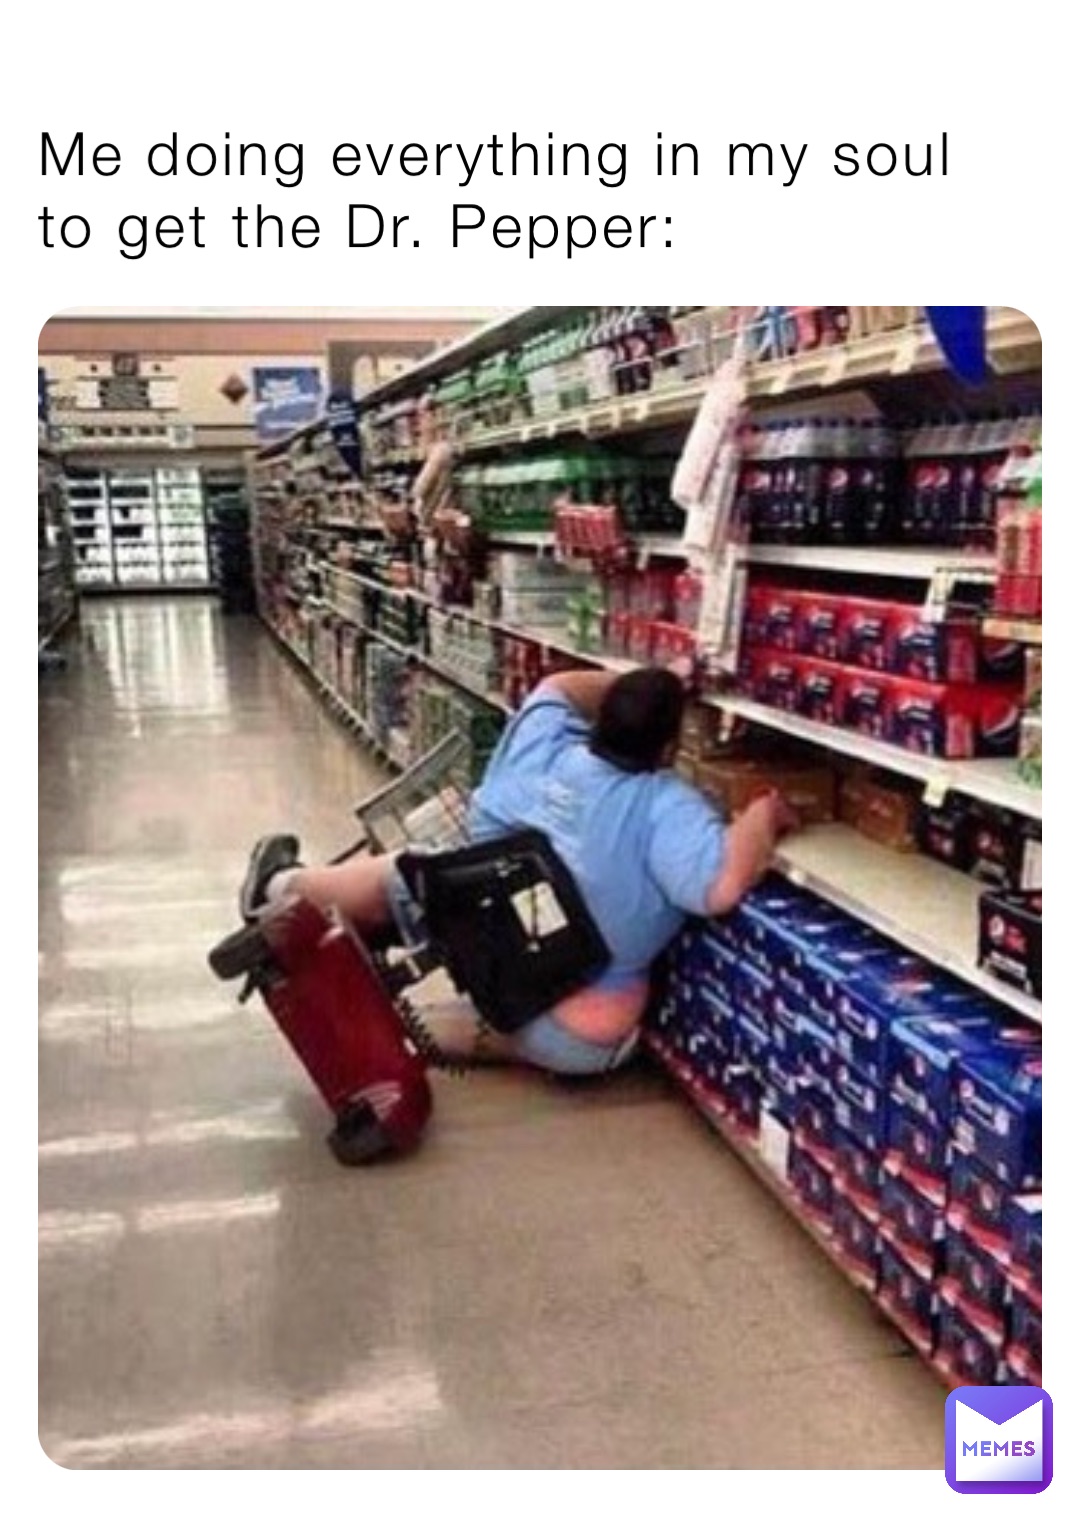 Me doing everything in my soul to get the Dr. Pepper: